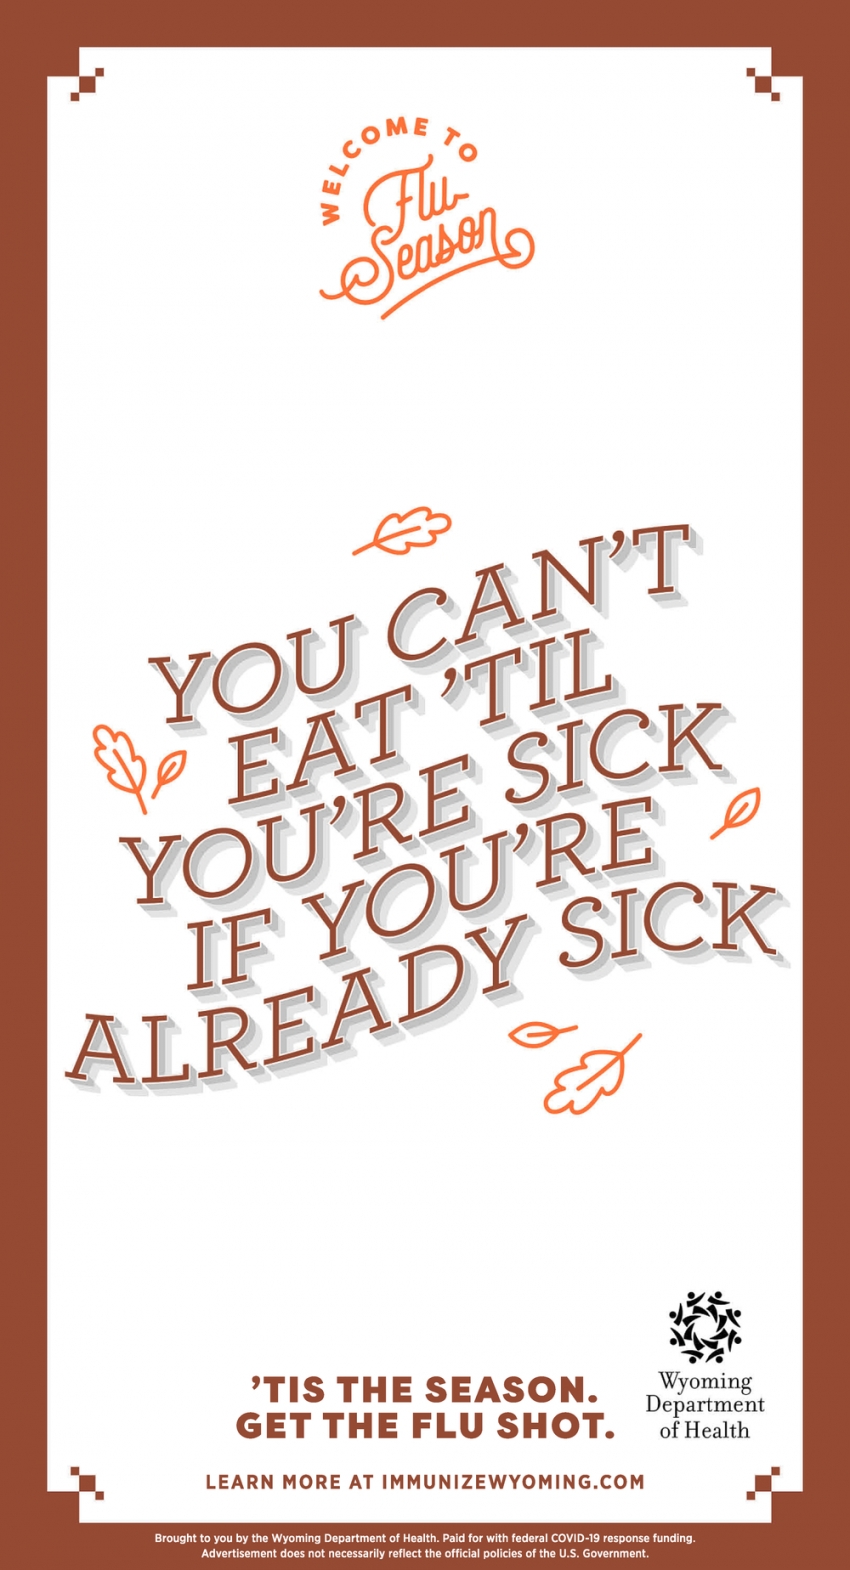 You Can't Eat 'Til You're Sick If You're Already Sick